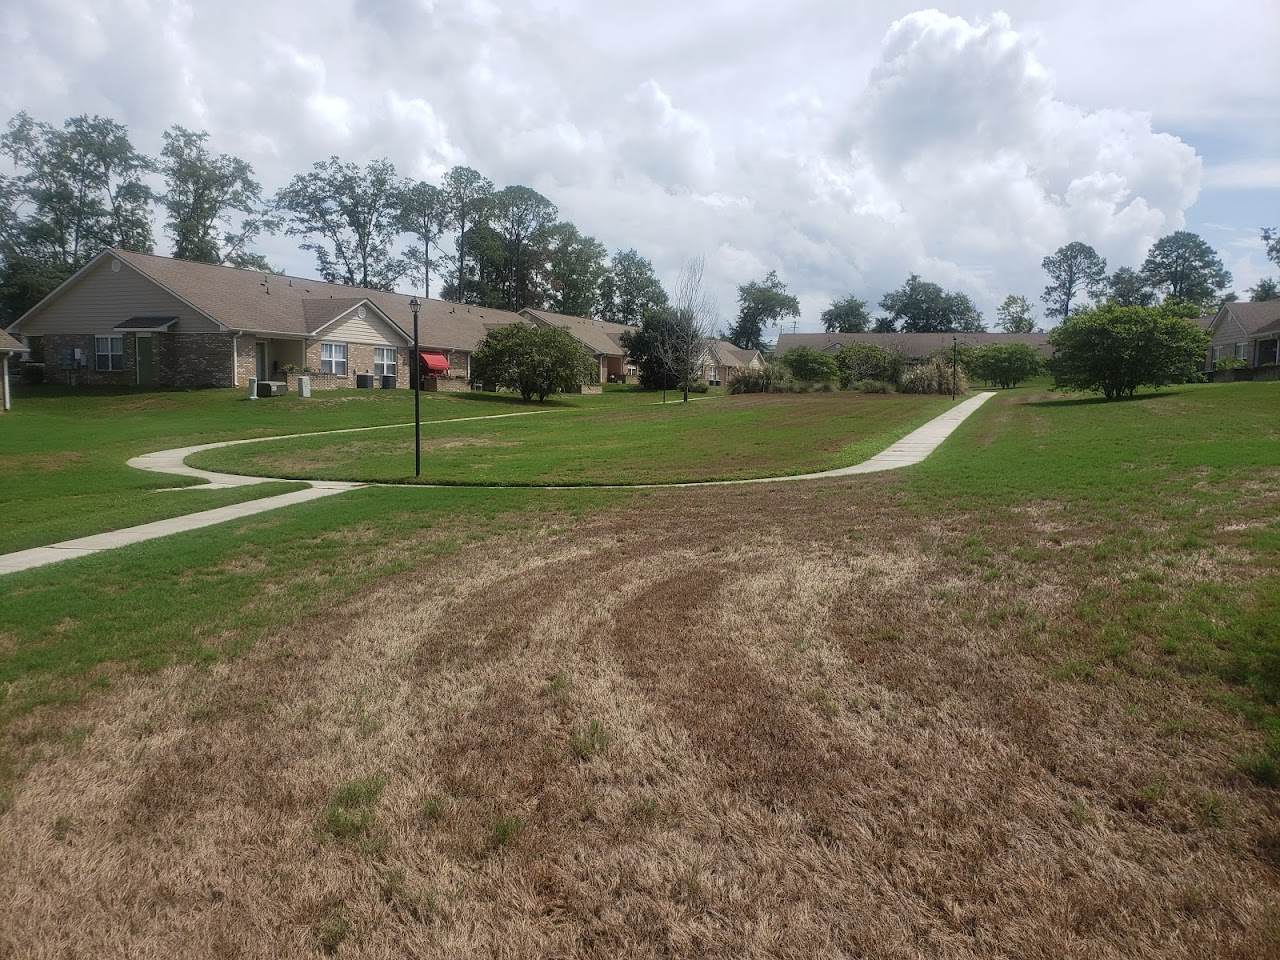 Photo of GRADY'S WALK. Affordable housing located at 2031 THIRD AVE DOTHAN, AL 36301